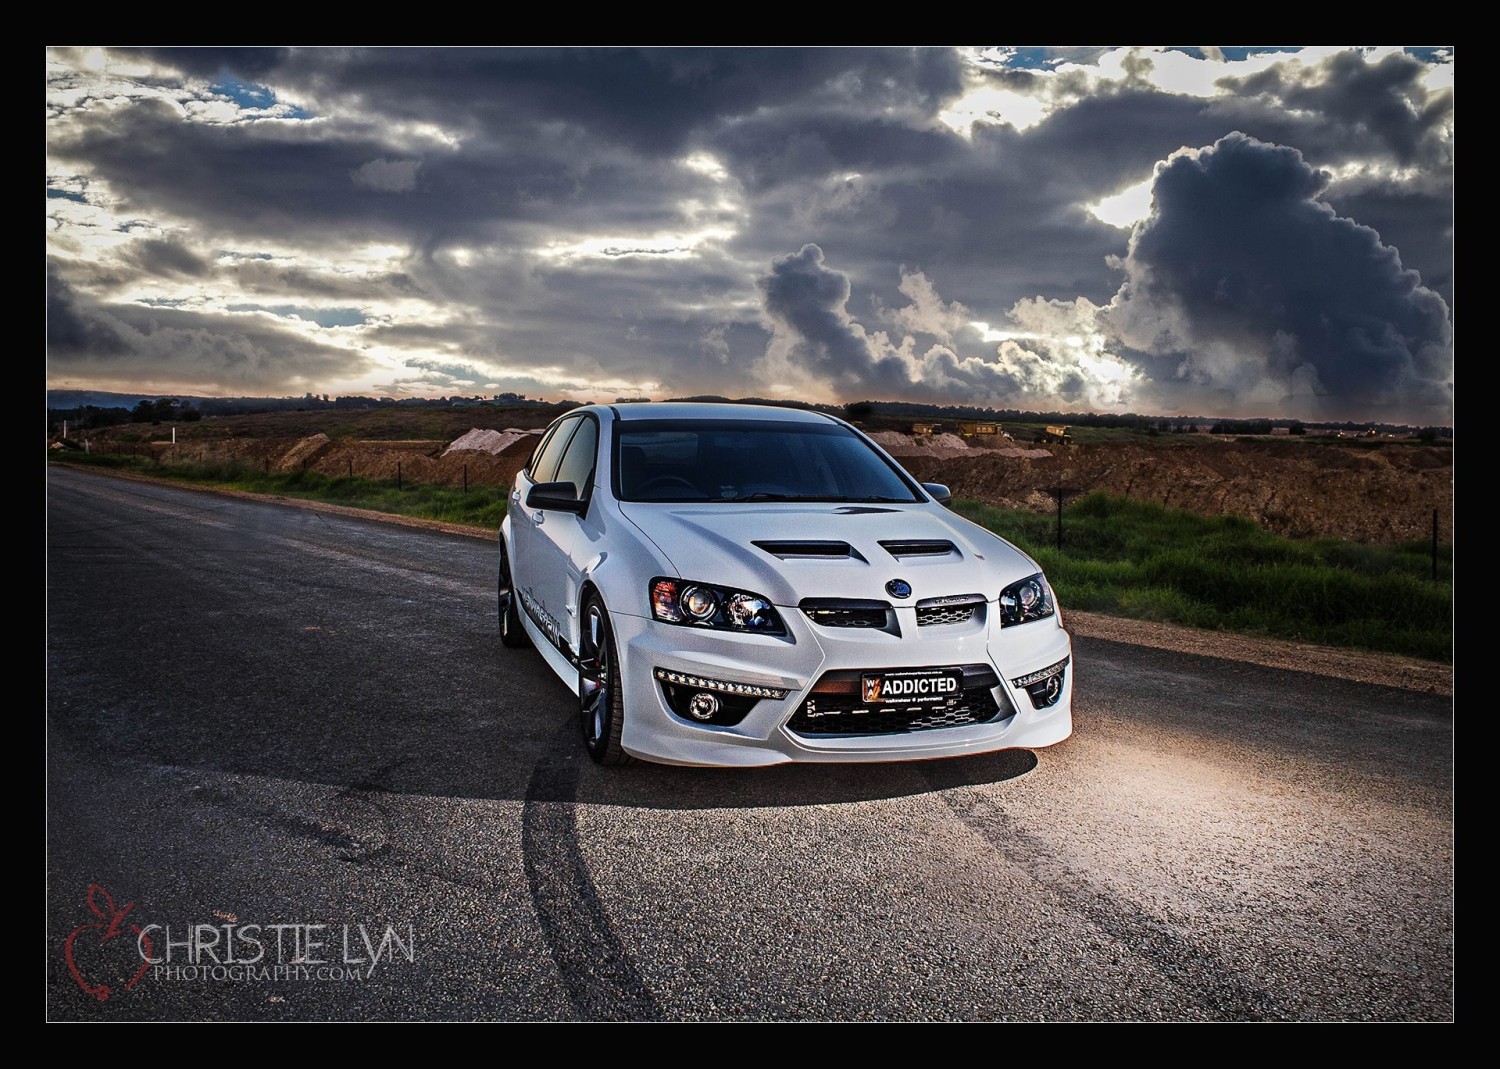 2012 Holden Special Vehicles R8